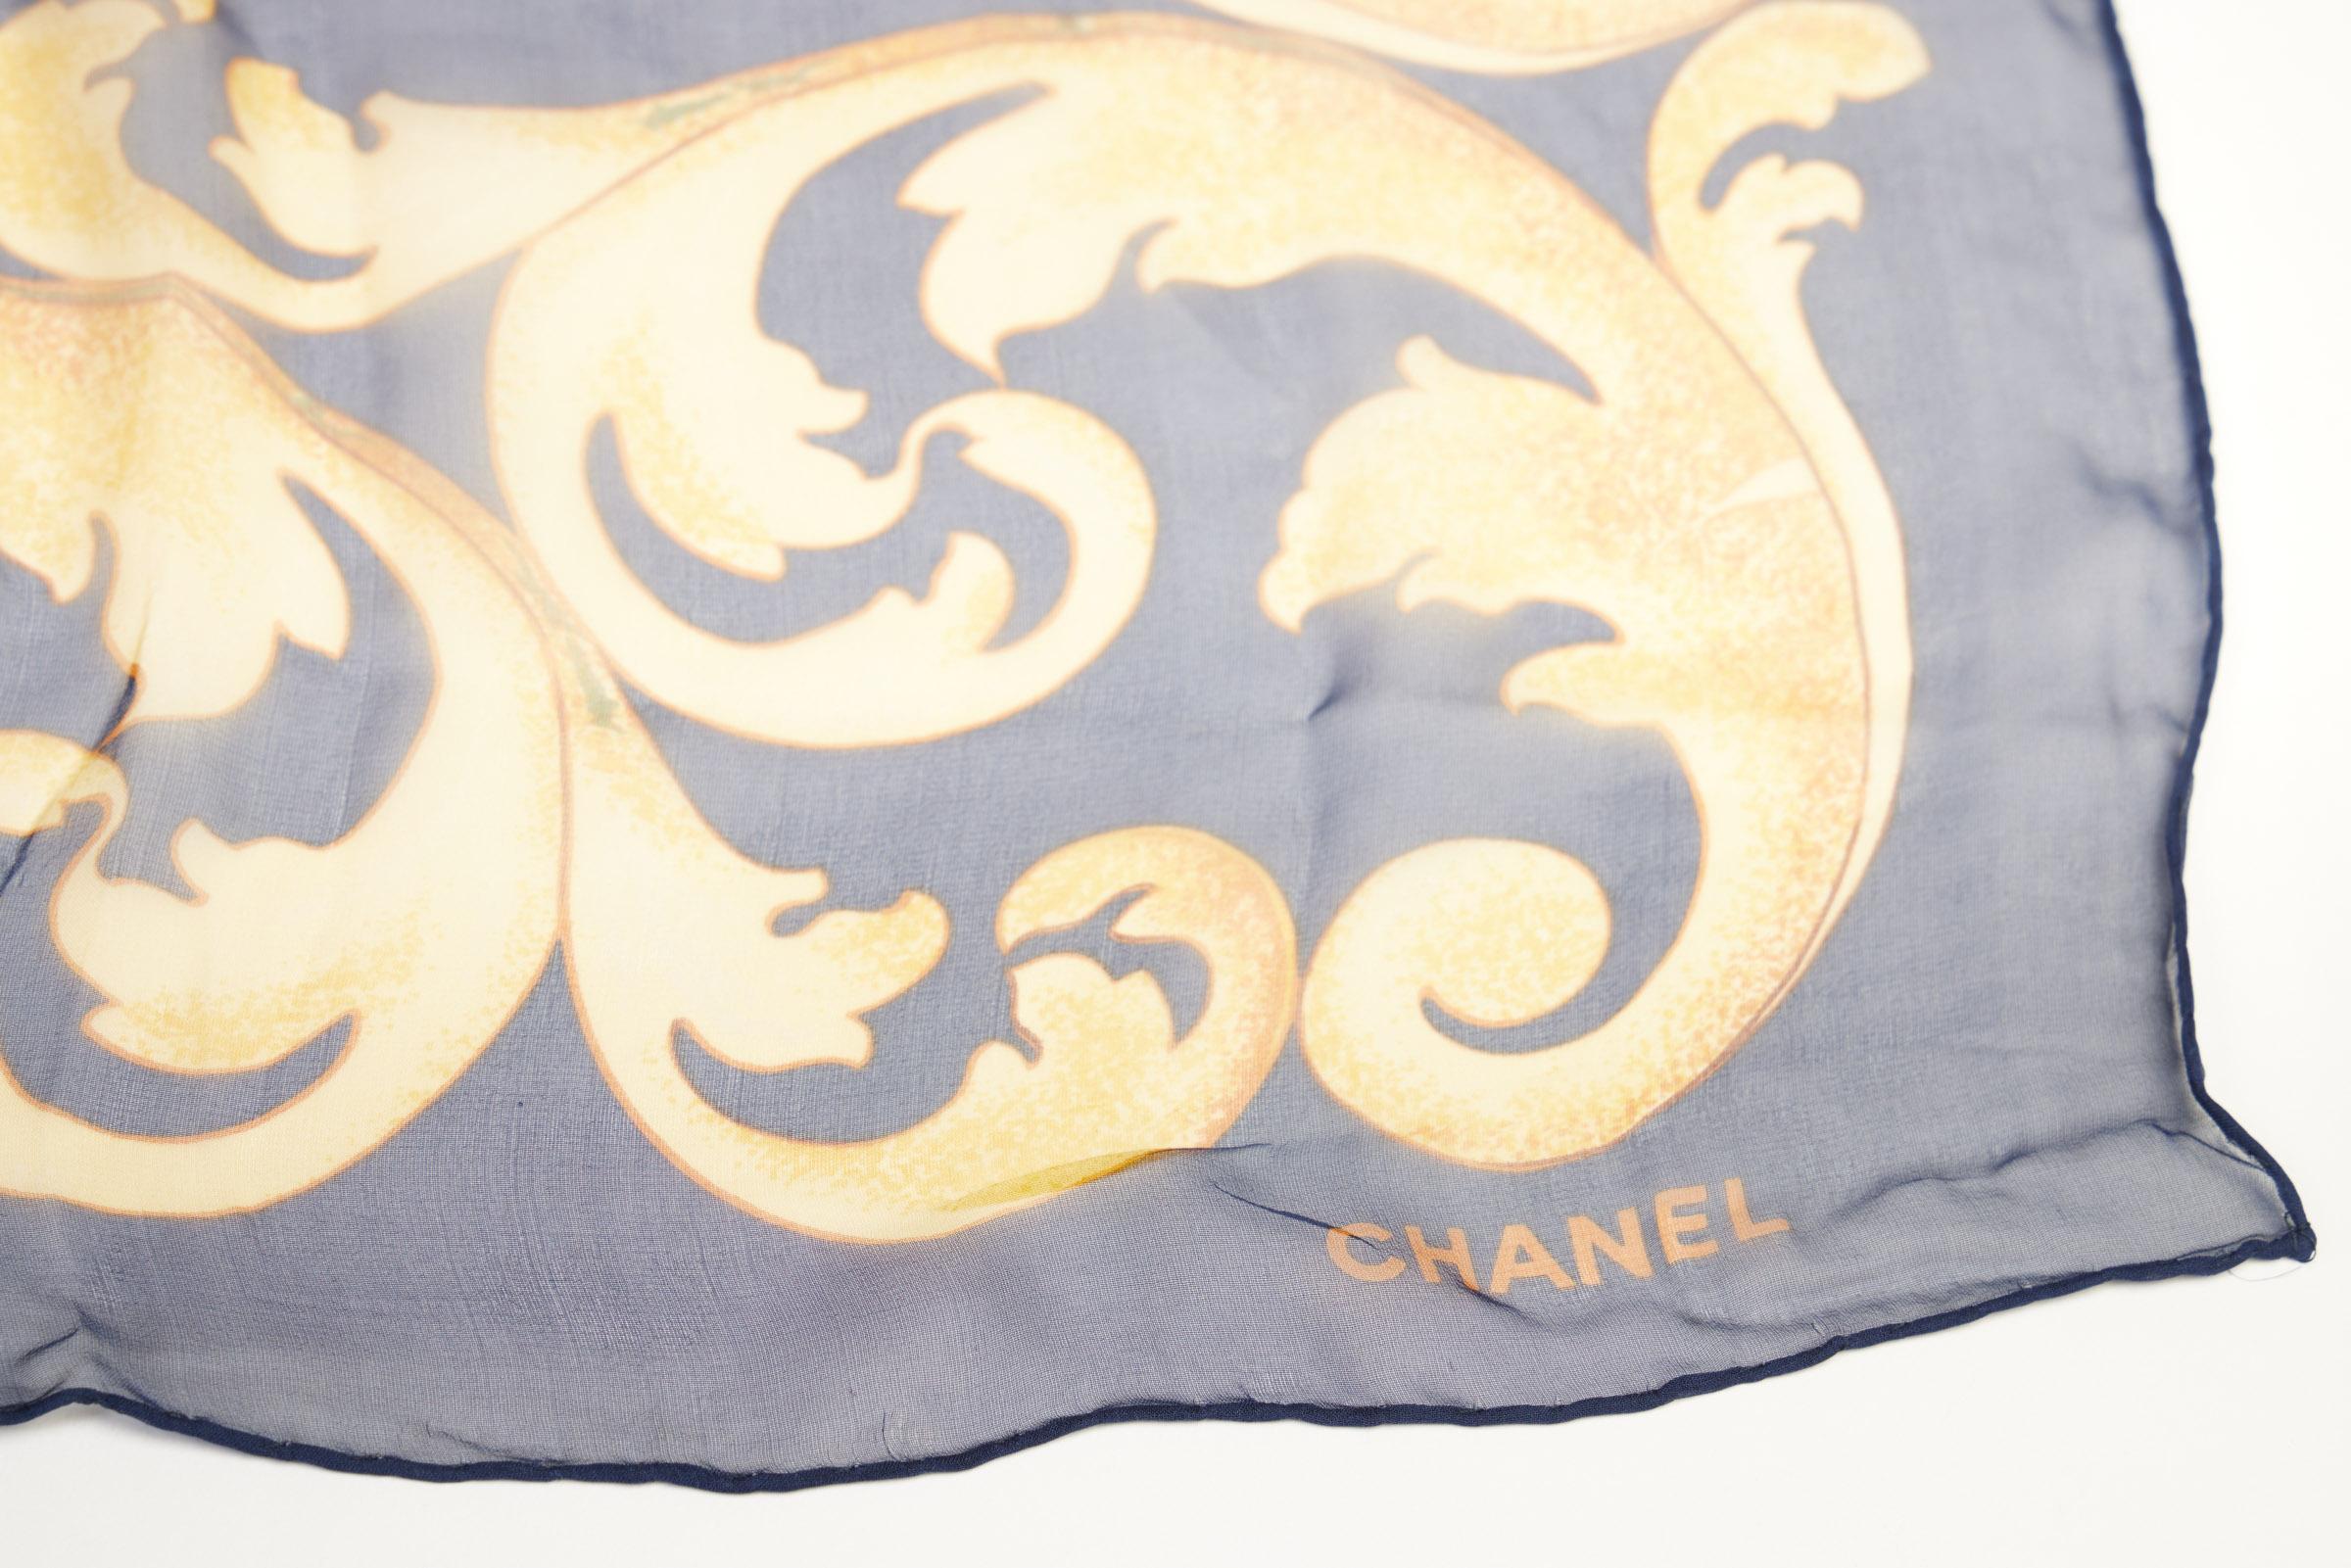 Chanel vintage blue silk chiffon scarf with yellow sunflowers design. Hand rolled edges. Original care tag.